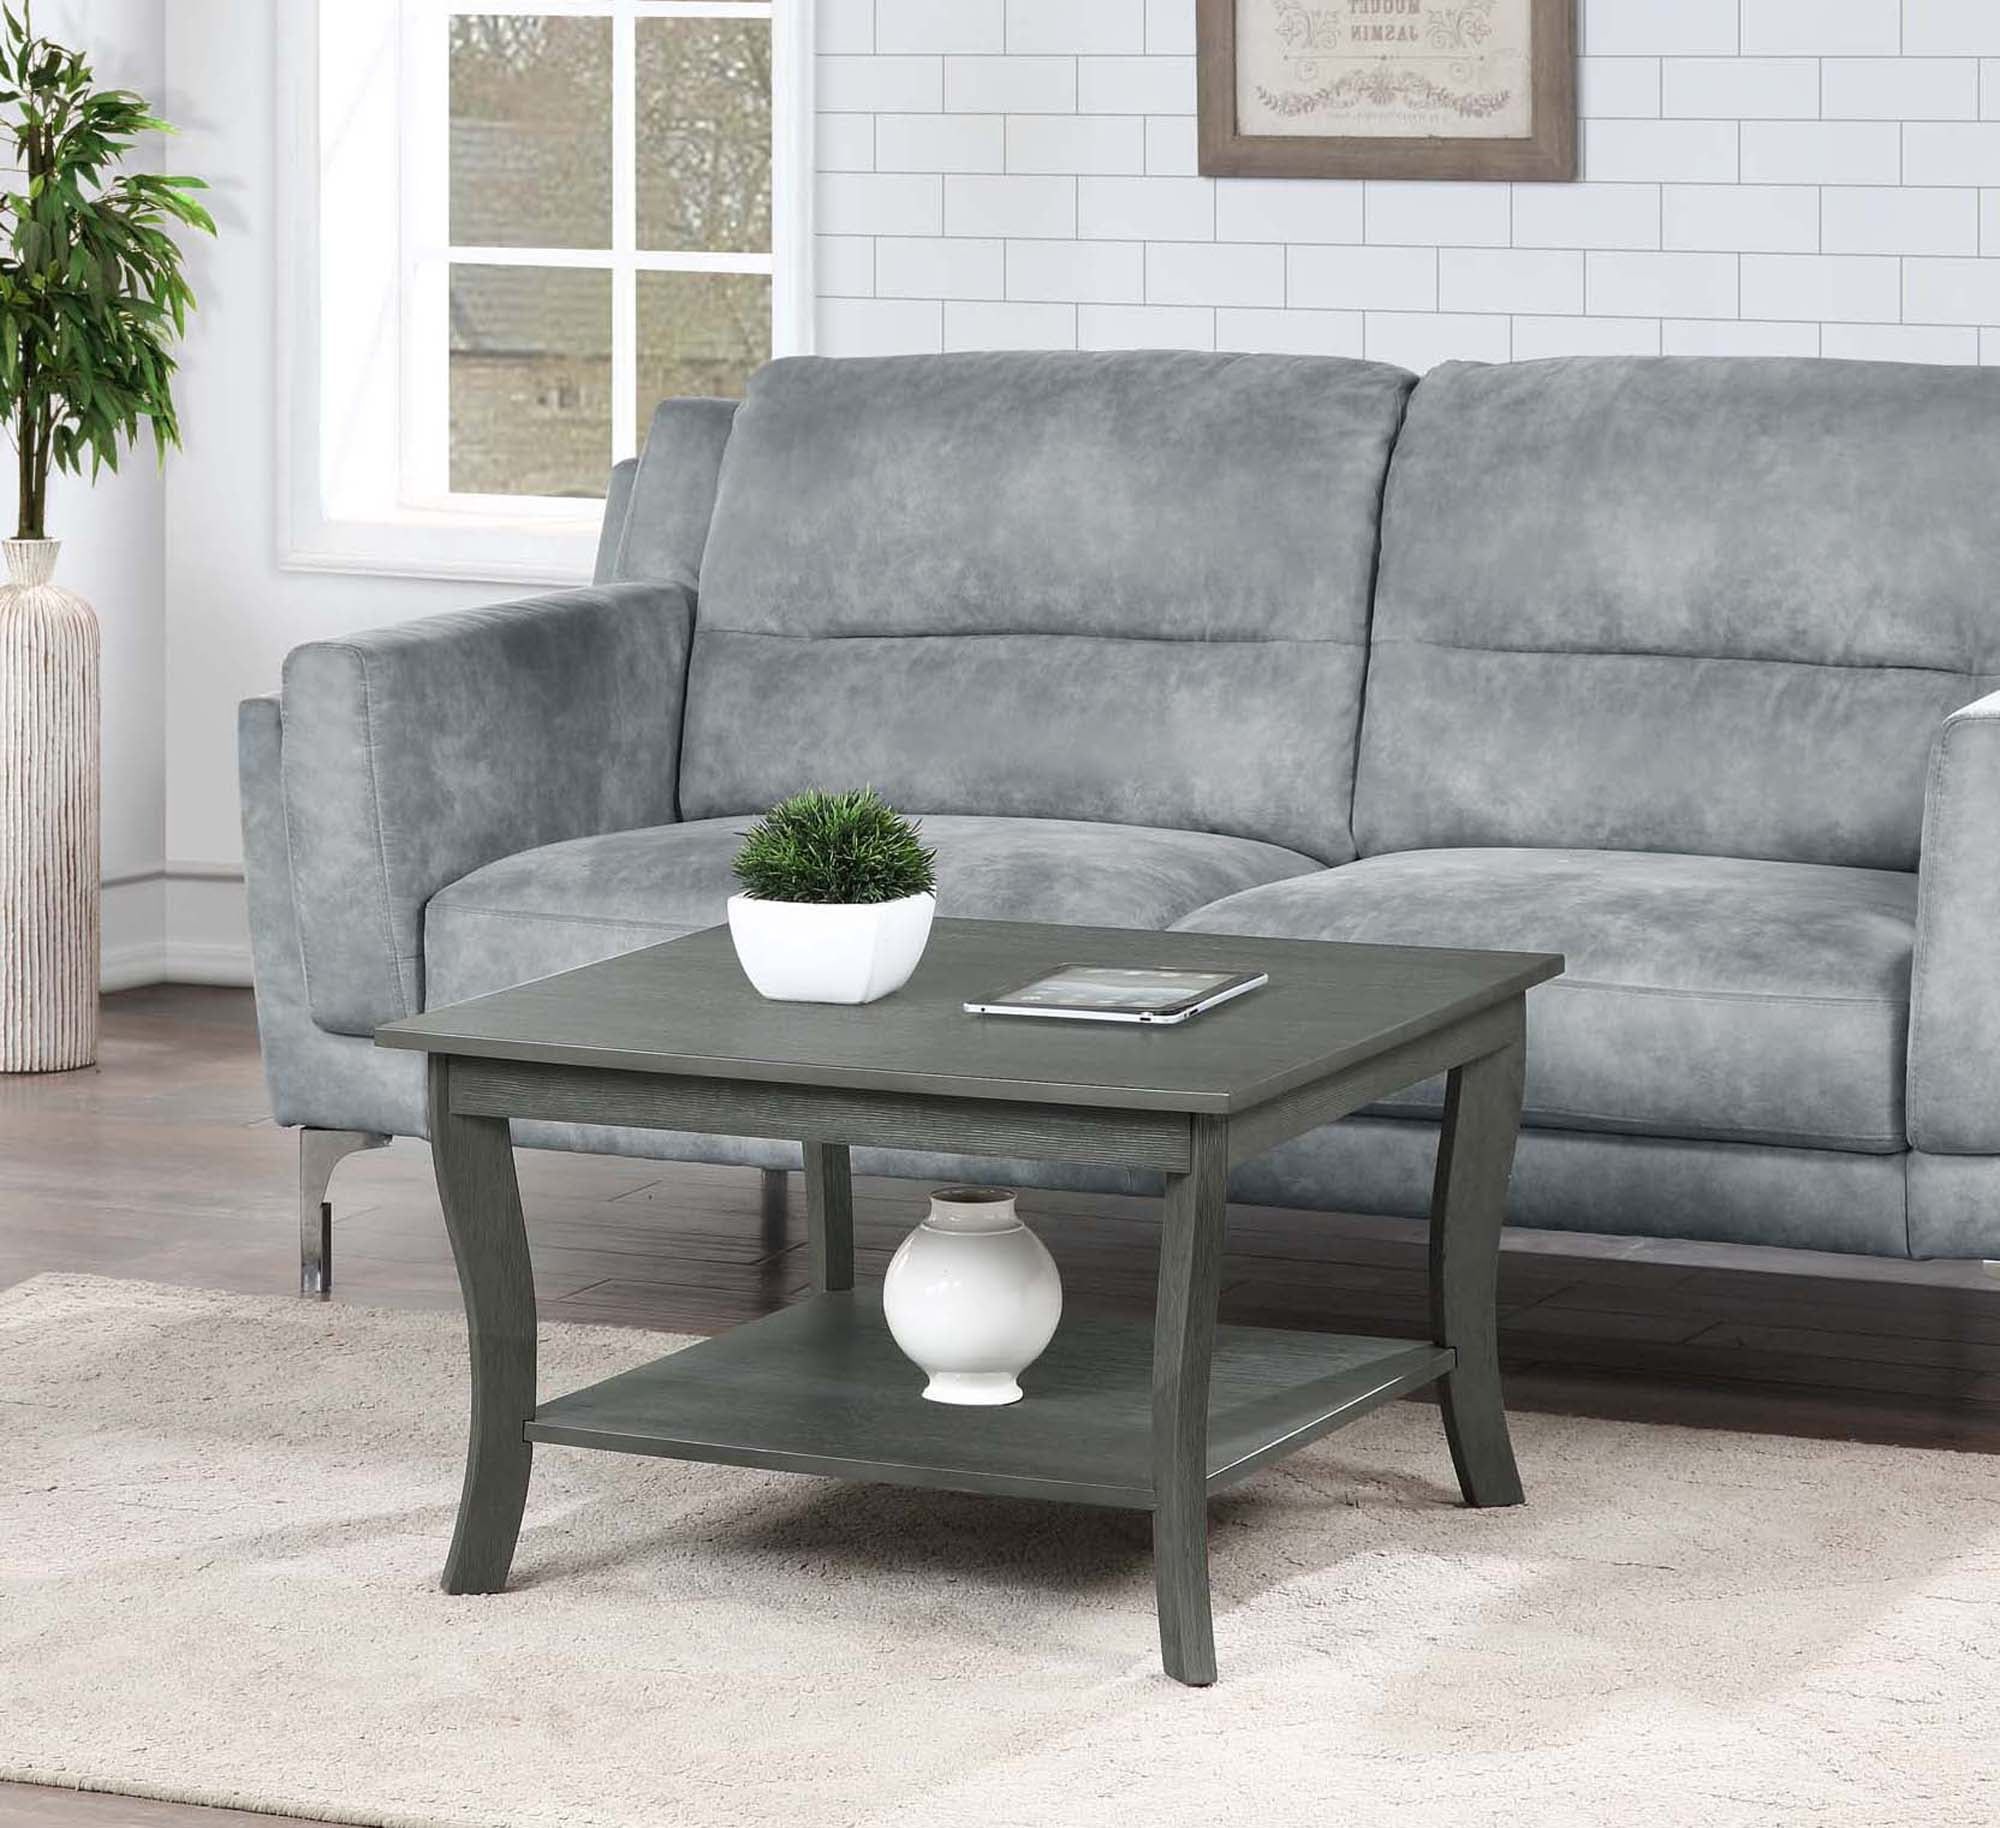 Convenience Concepts American Heritage Square Coffee Table, Multiple With Regard To Transitional Square Coffee Tables (View 6 of 20)